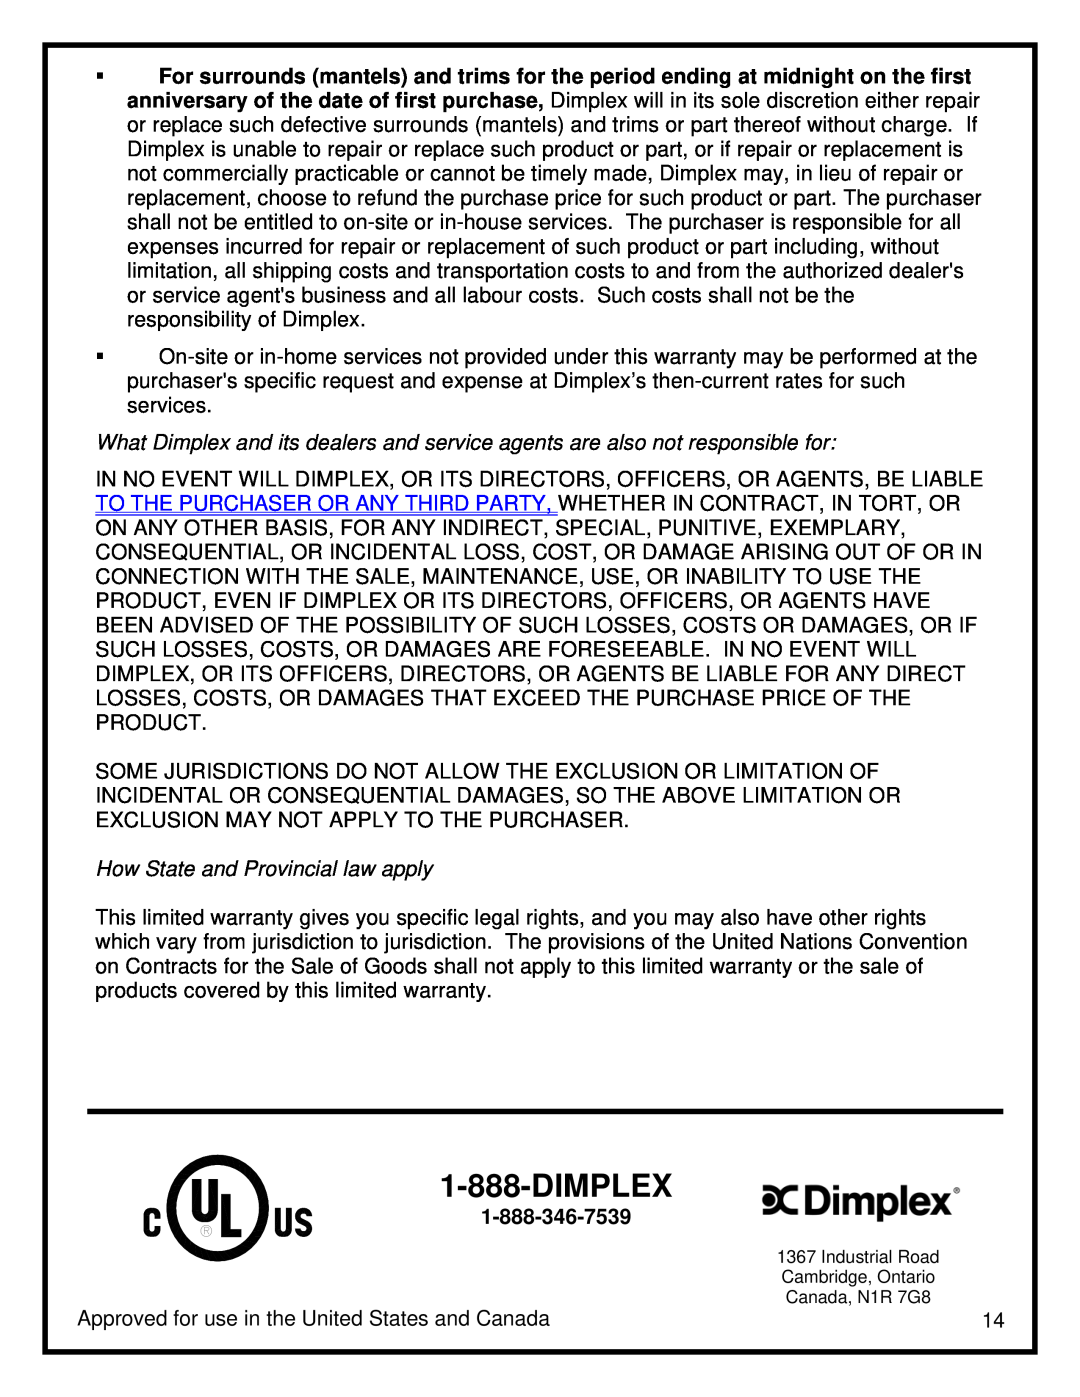 Dimplex DF3015 manual Dimplex, How State and Provincial law apply 